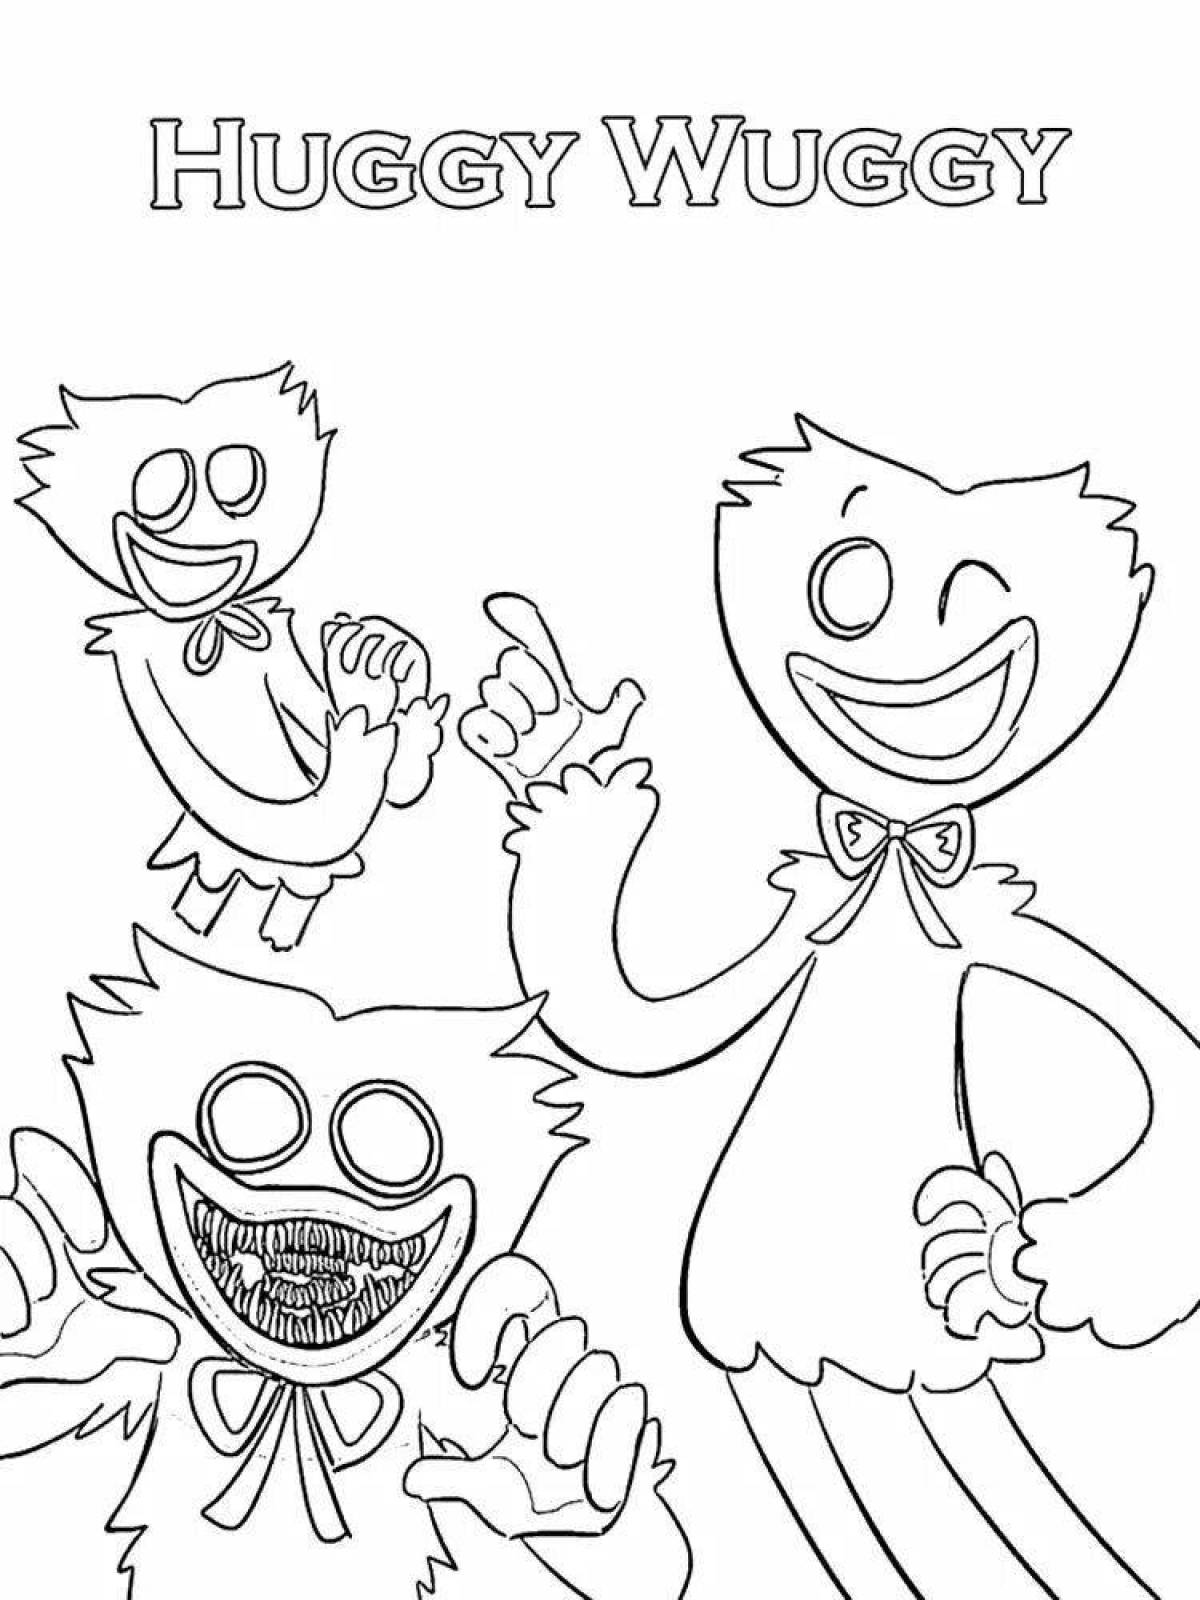 Fascinating poppy playtime coloring page